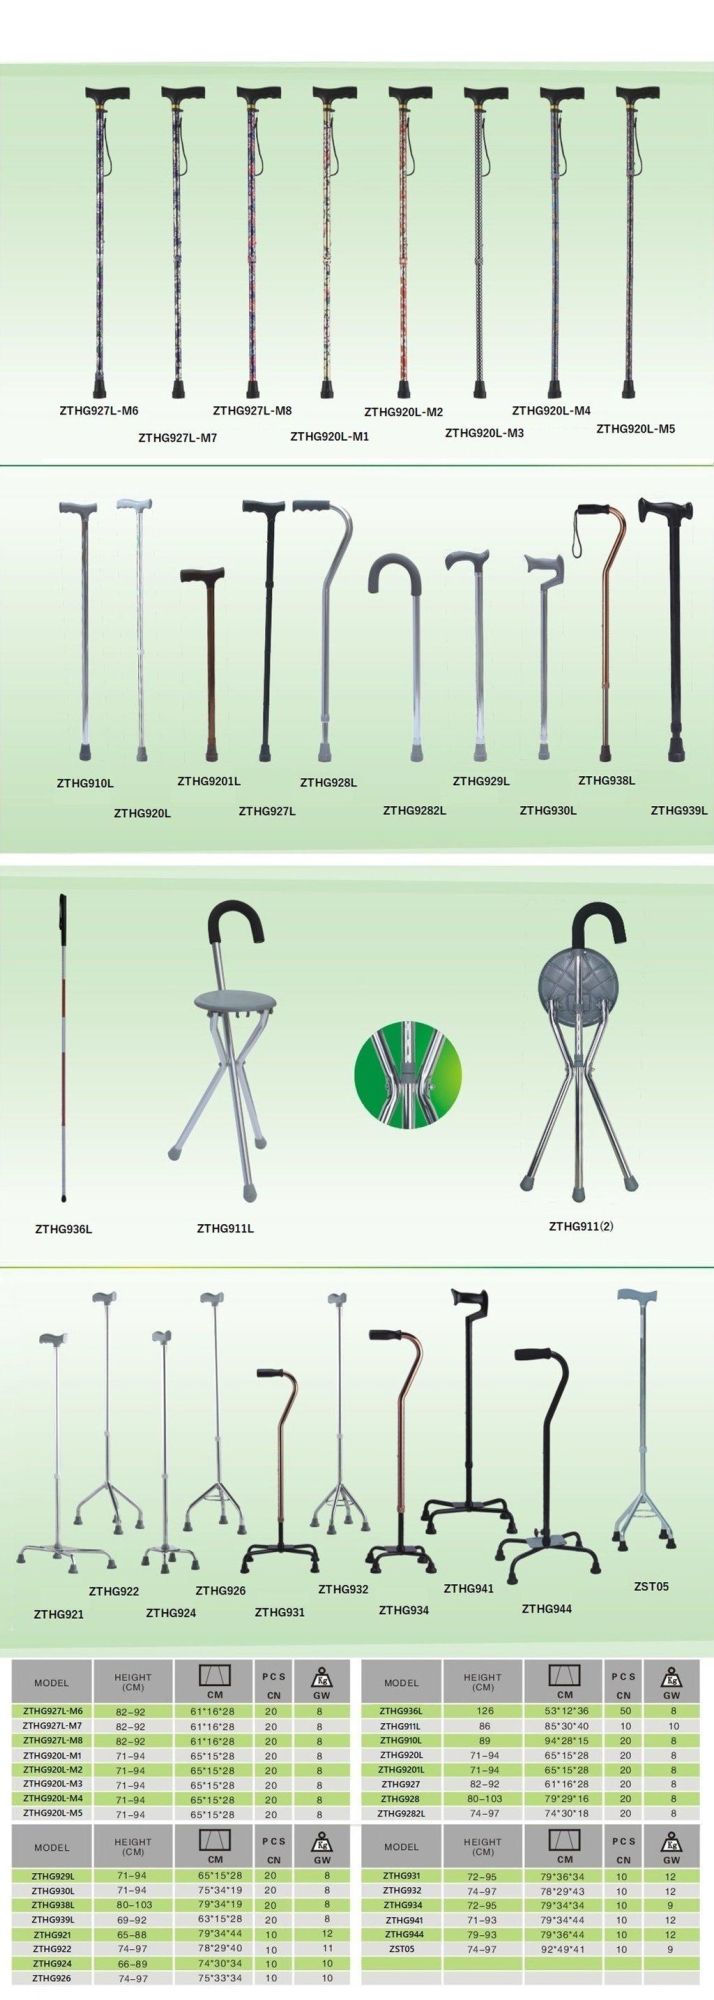 Four Legs Offset Handle Quad Crutch Colorful Lightweight Adjustable Height Strong Safety Walking Stick for Disabled/Elderly People Outdoor Aluminum Product